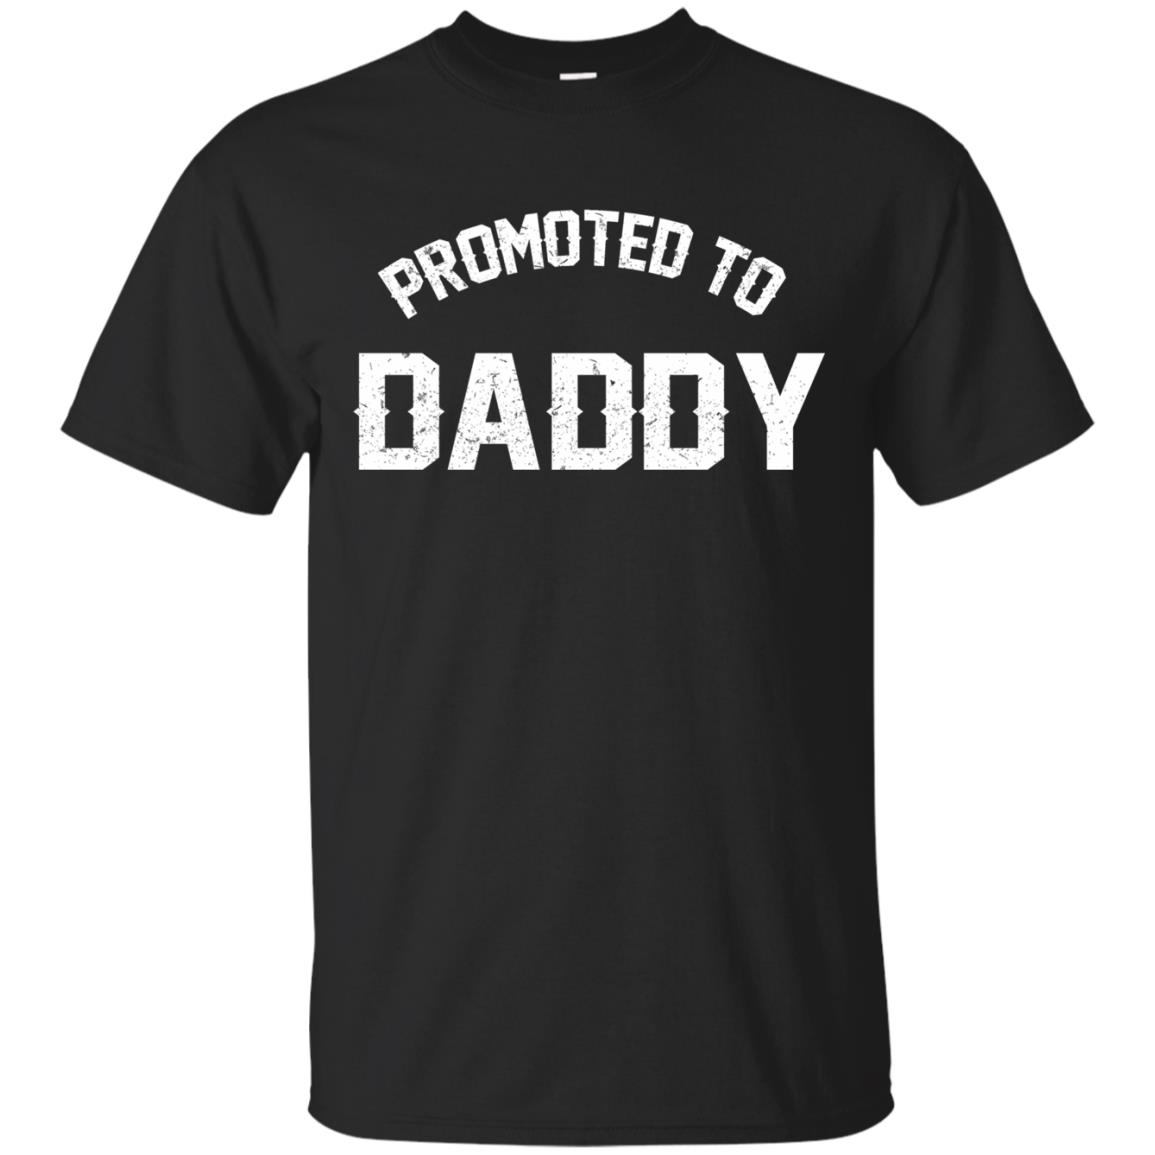 Promoted To Daddy T Shirt - 10% Off - FavorMerch